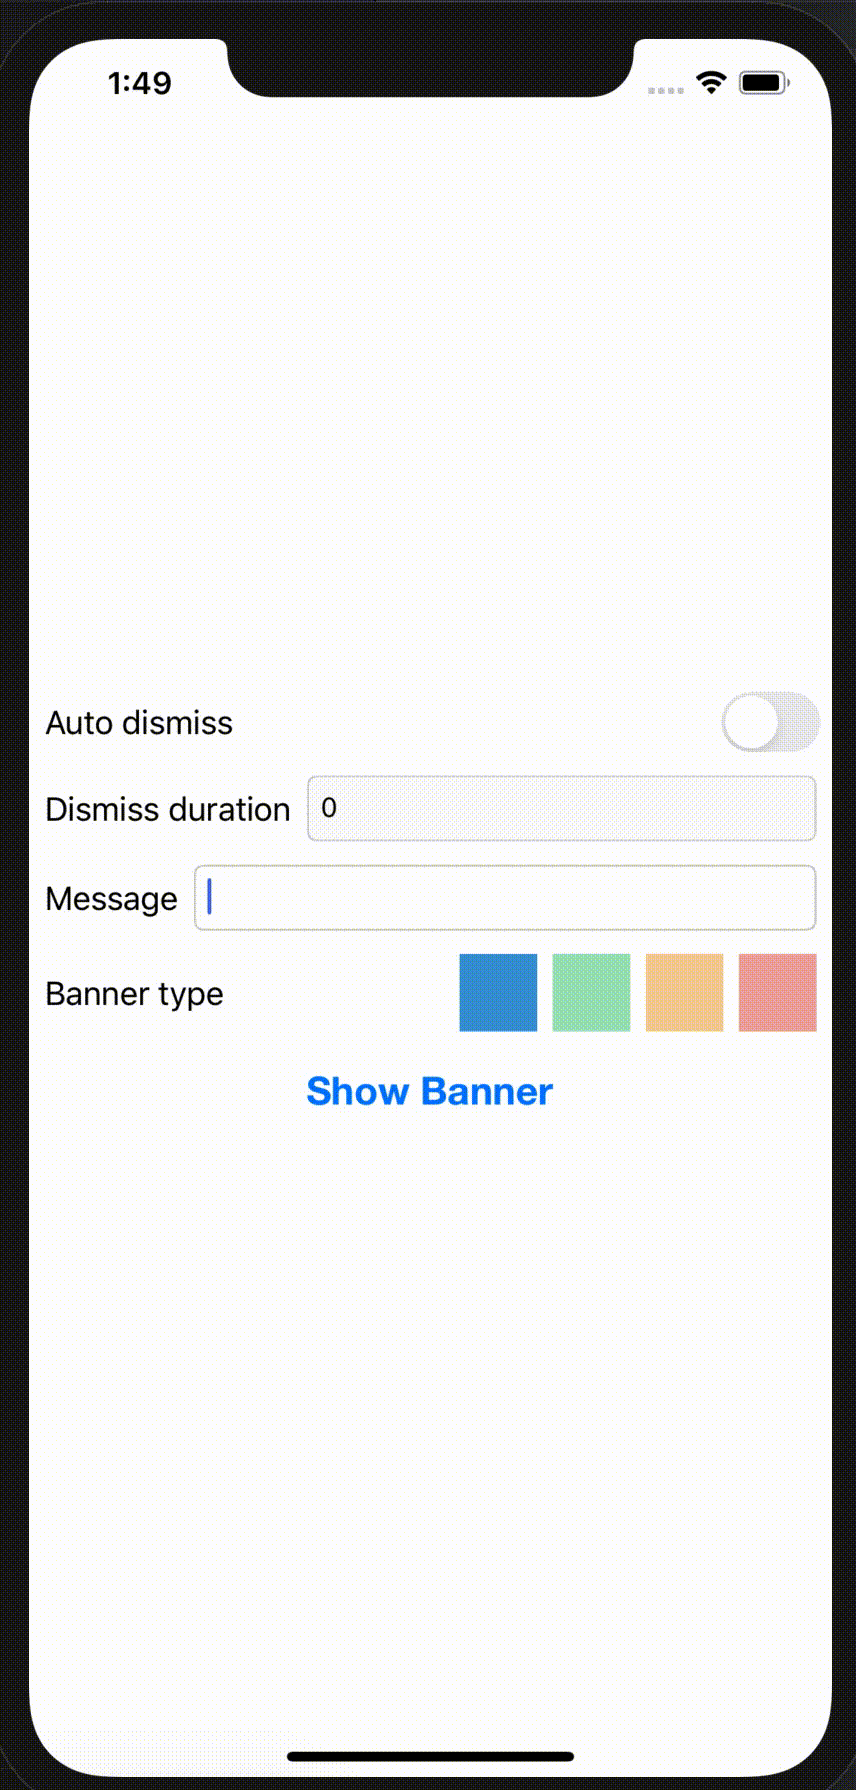 Banners with Types